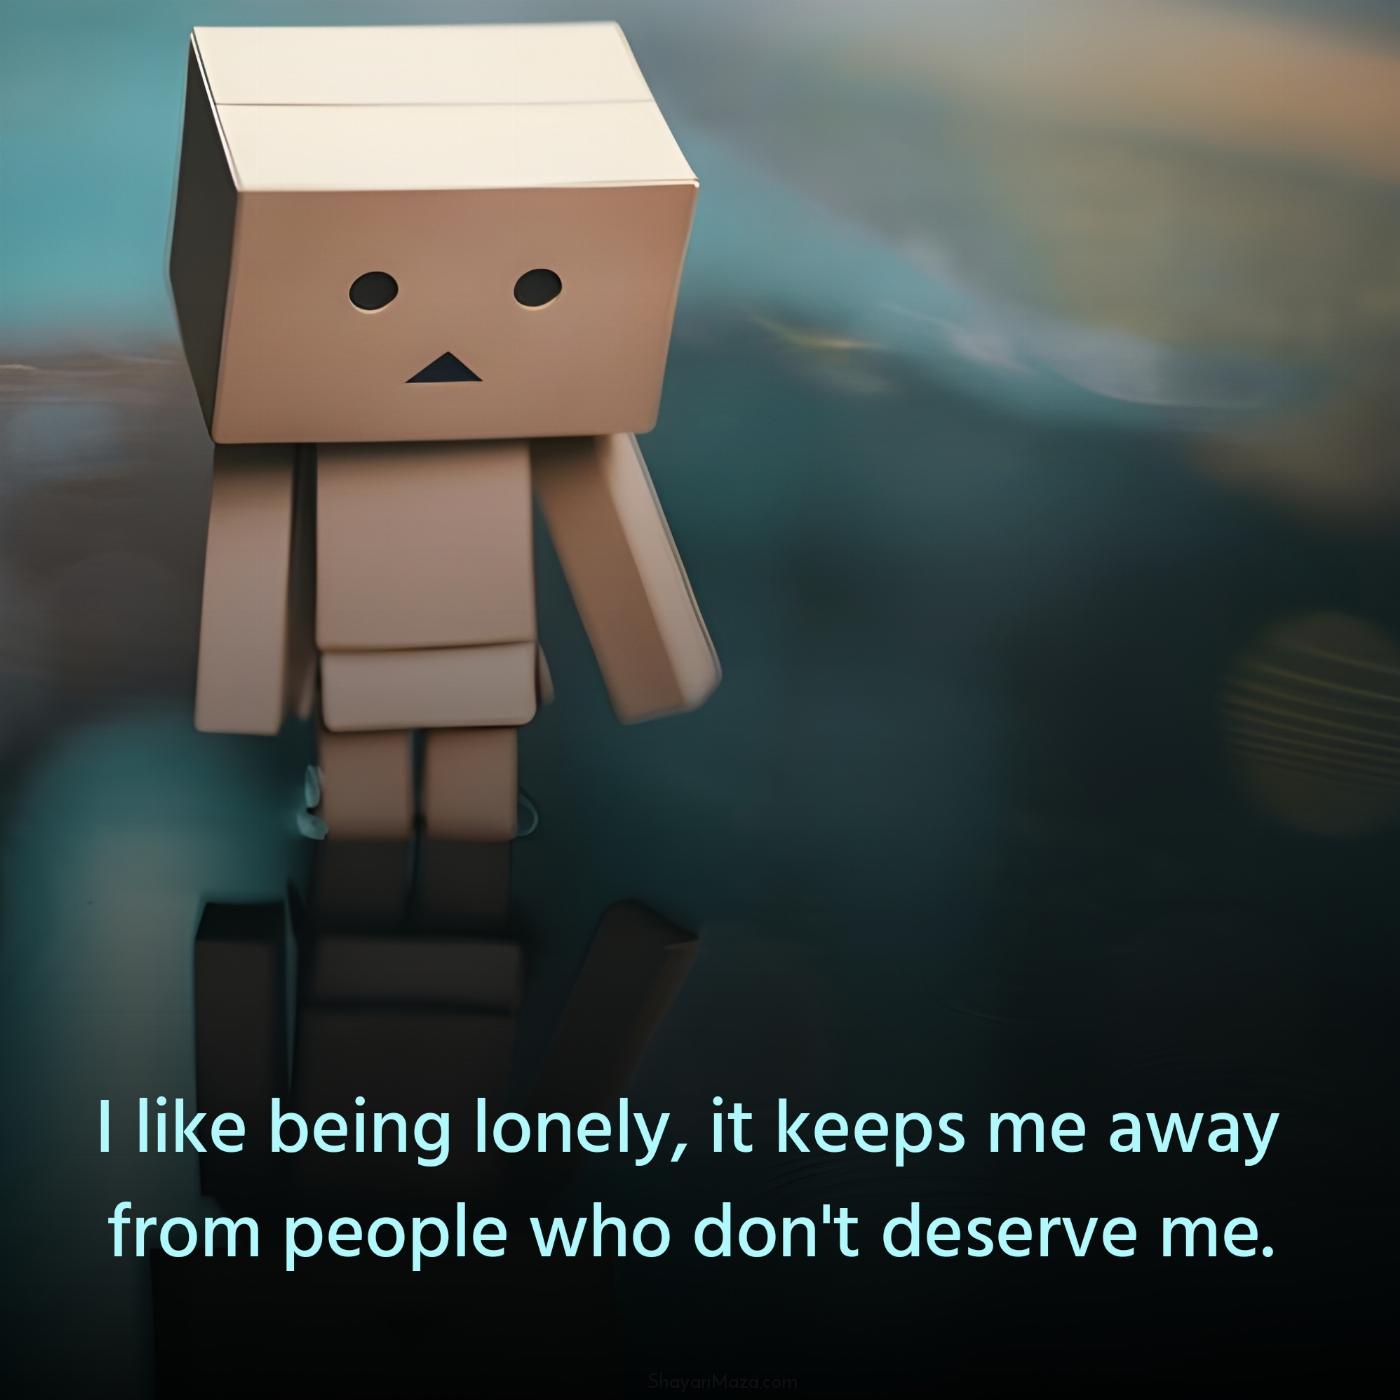 I like being lonely it keeps me away from people